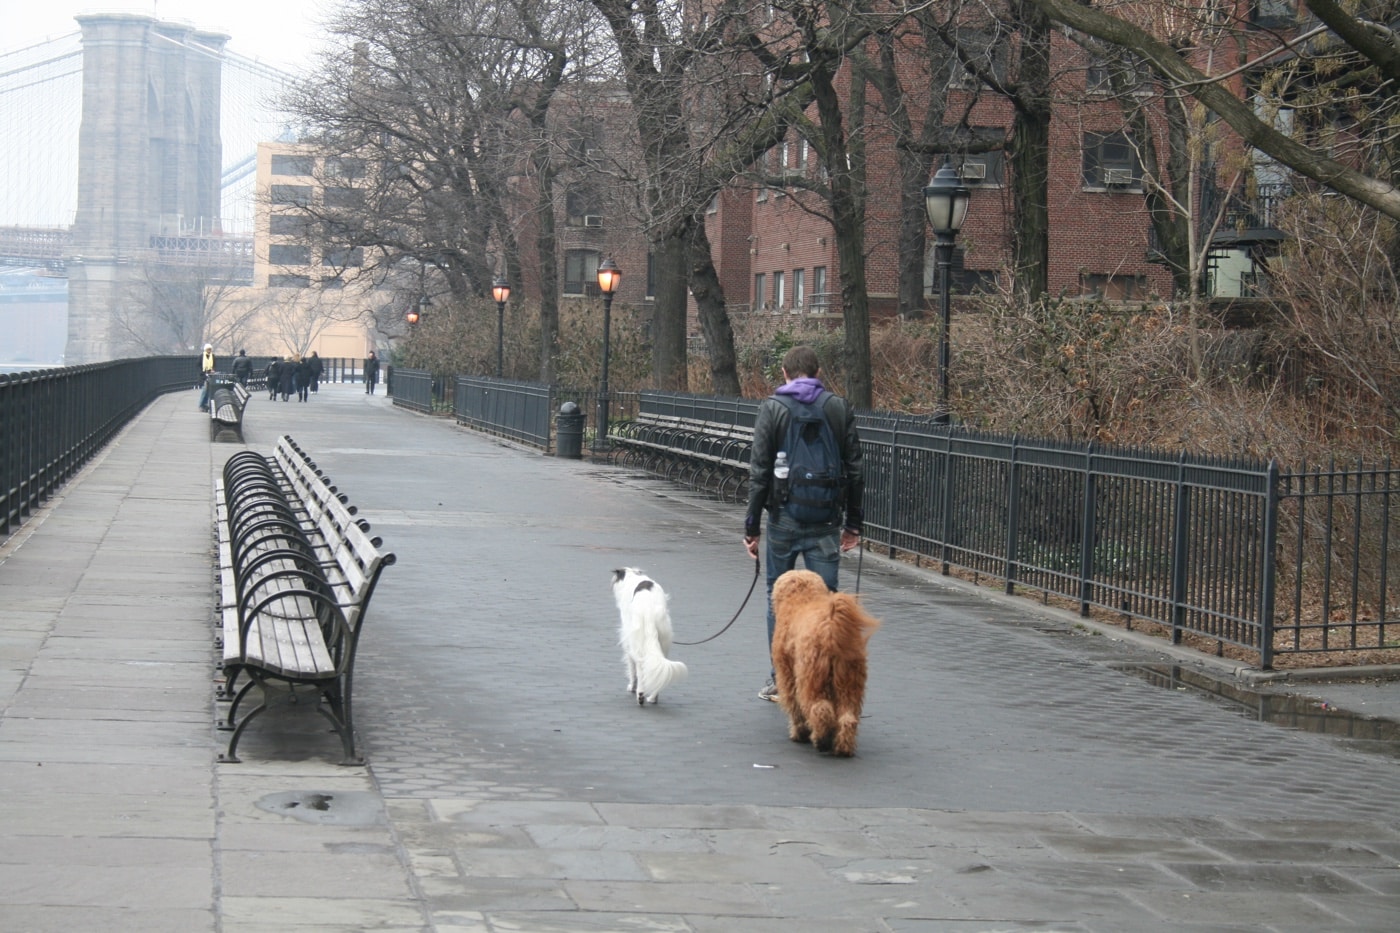 walking dogs in the city